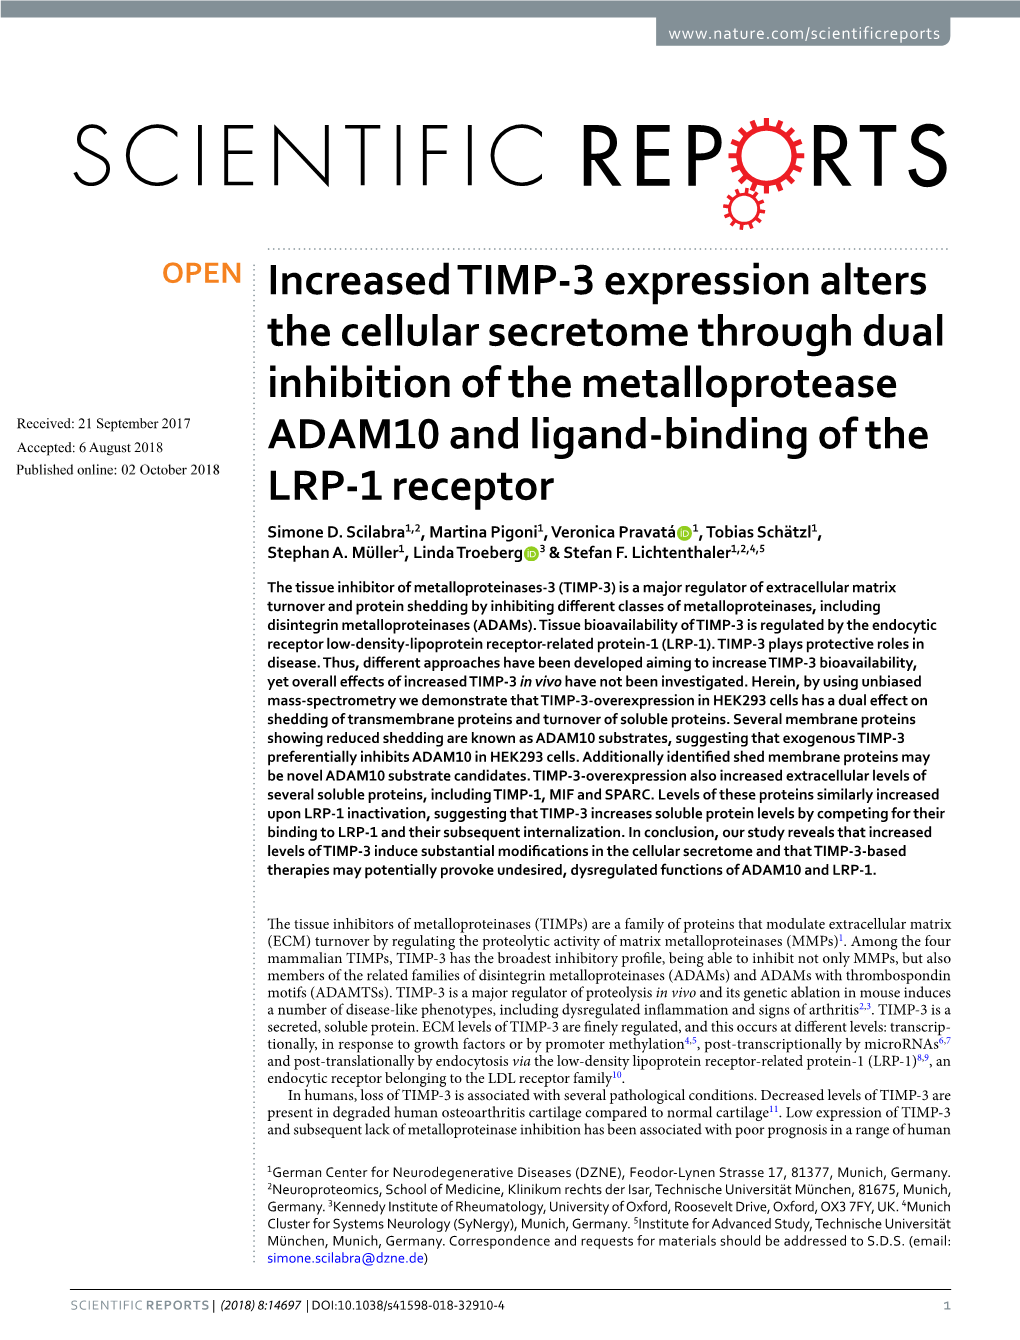 Increased TIMP-3 Expression Alters the Cellular Secretome Through Dual